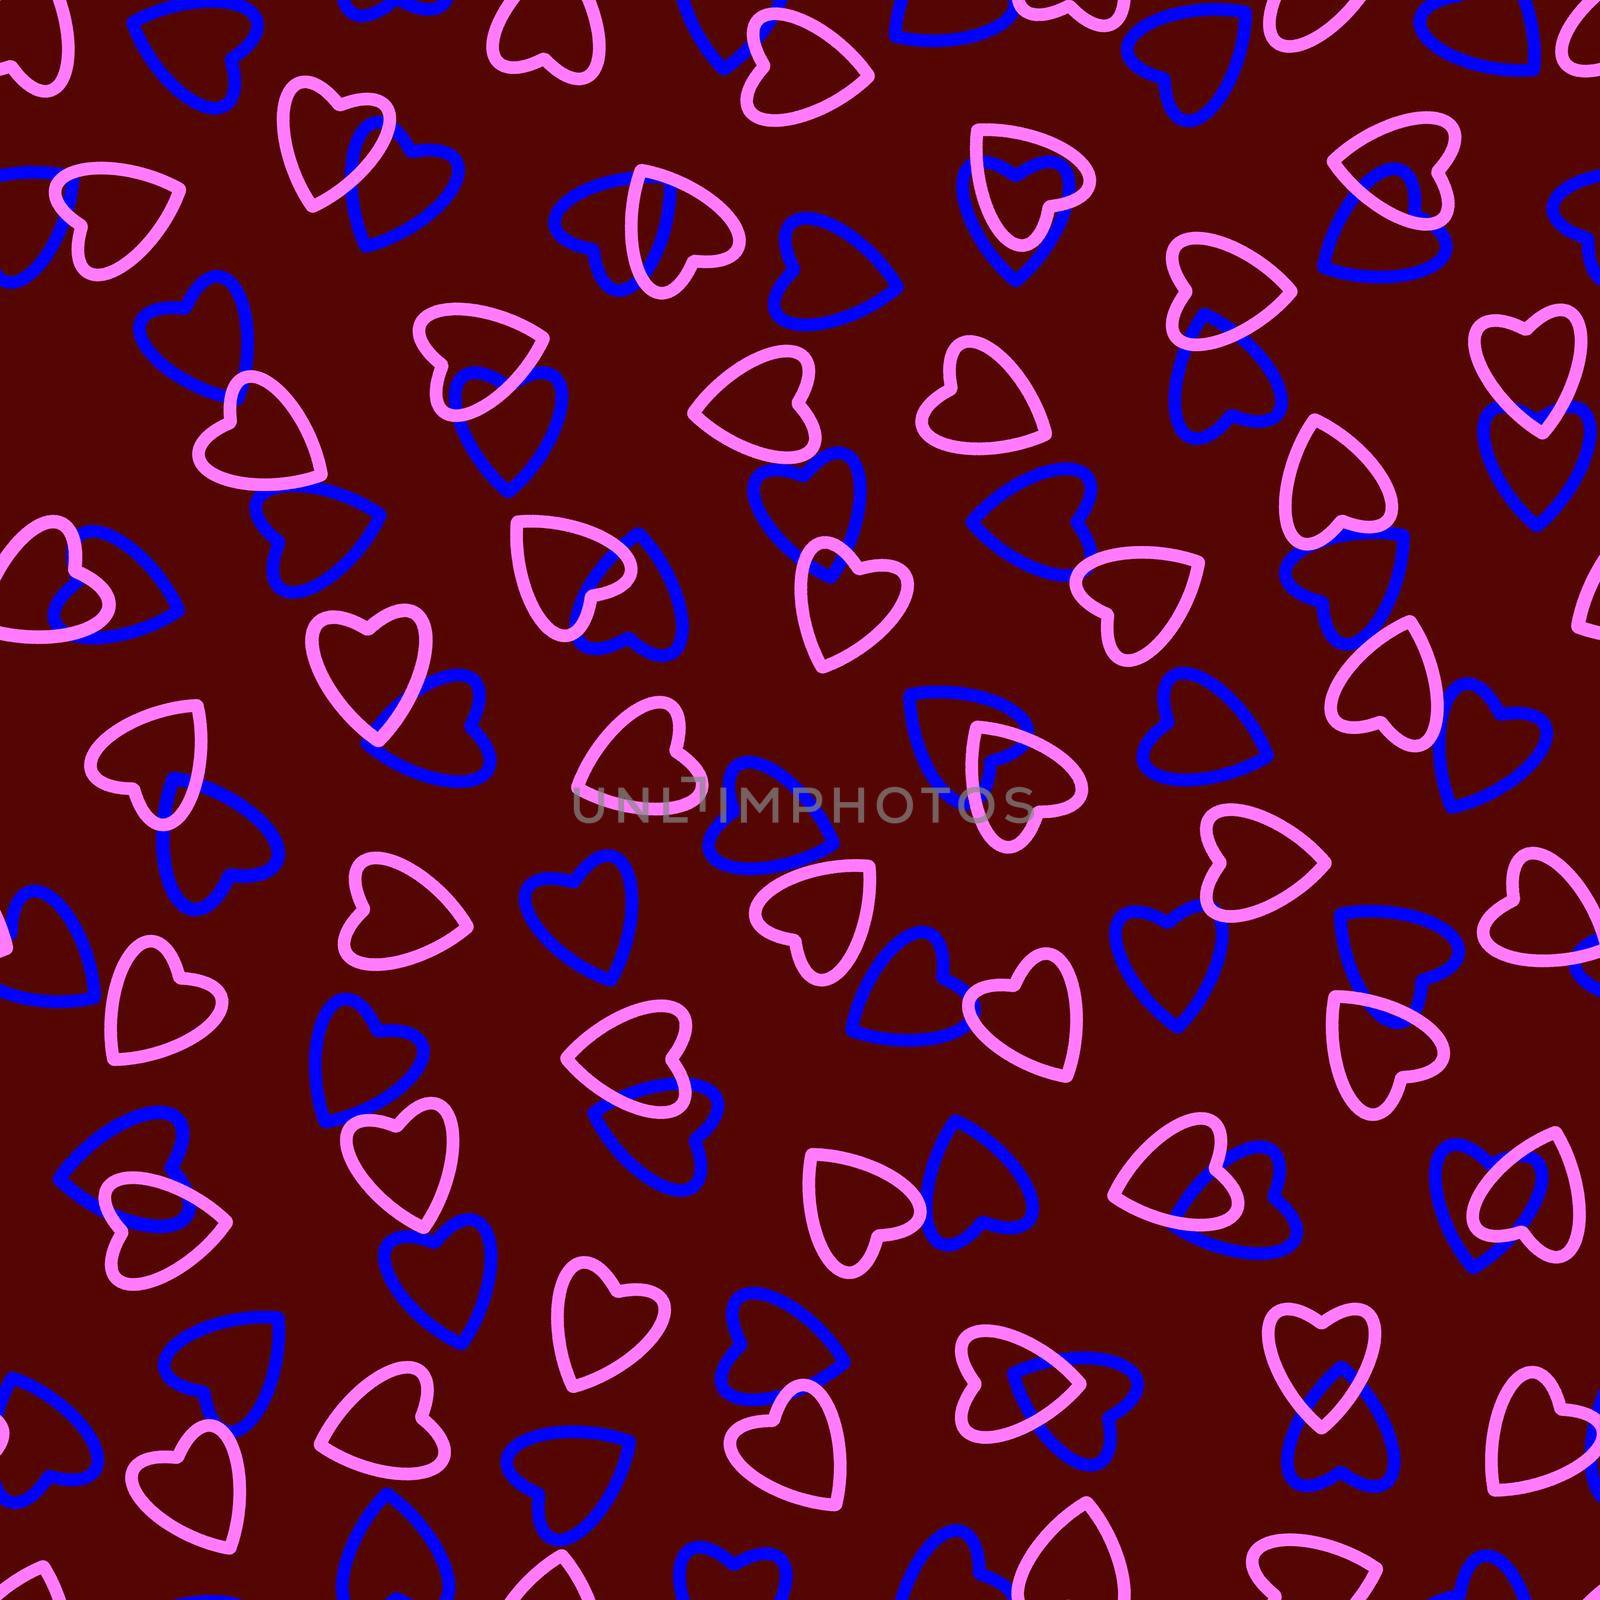 Simple hearts seamless pattern,endless chaotic texture made tiny heart silhouettes.Valentines,mothers day background.Great for Easter,wedding,scrapbook,gift wrapping paper,textiles.Blue,pink,burguny.